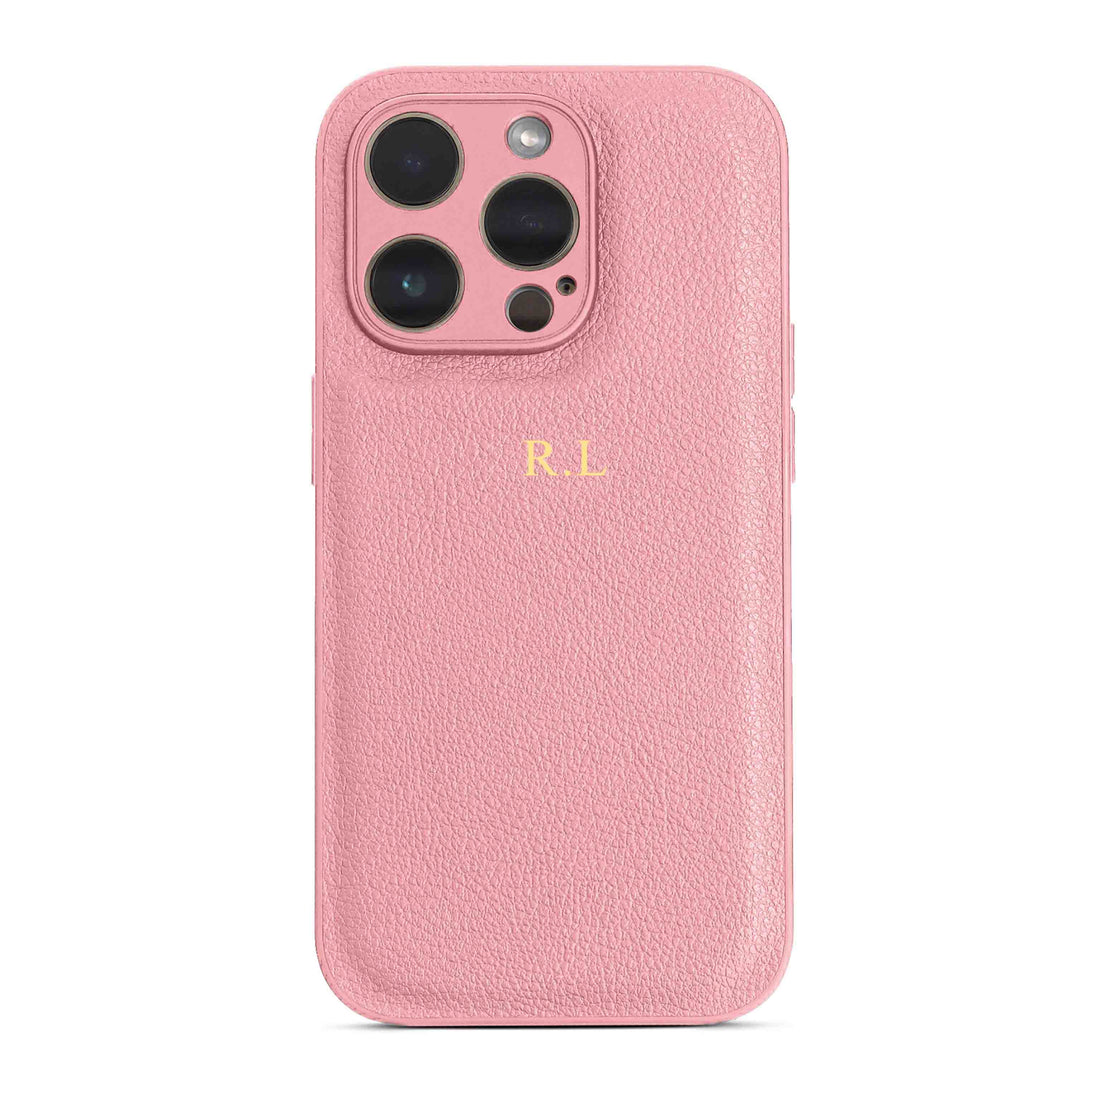 Pink Leather iPhone Case